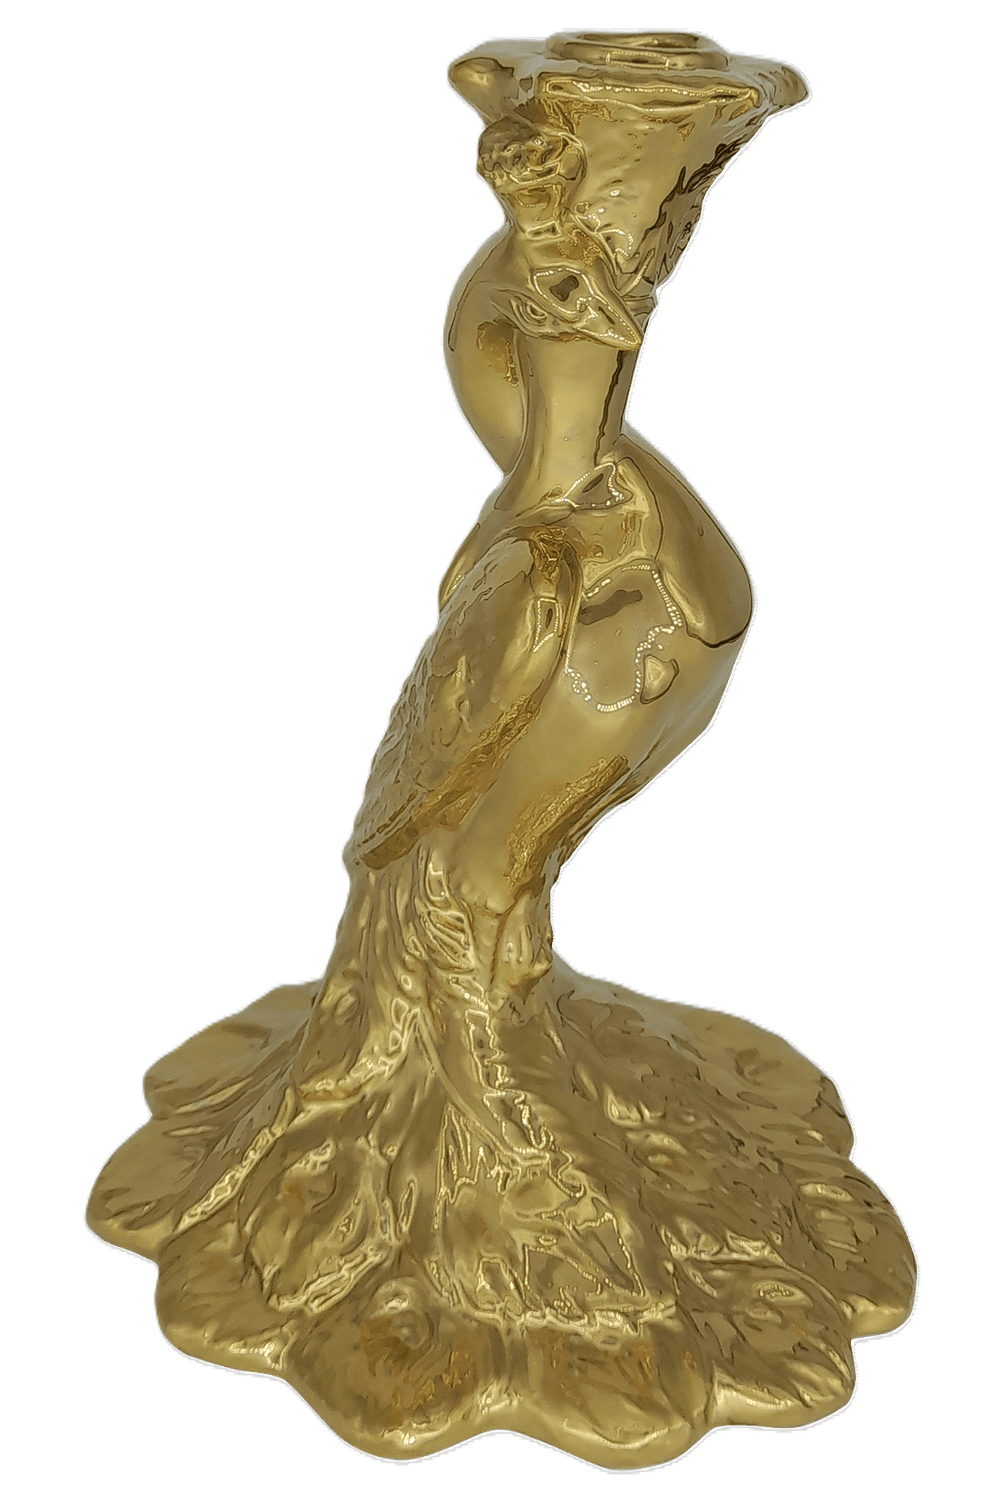 La Managerie Ottomane  Peacock Candlestick Gold